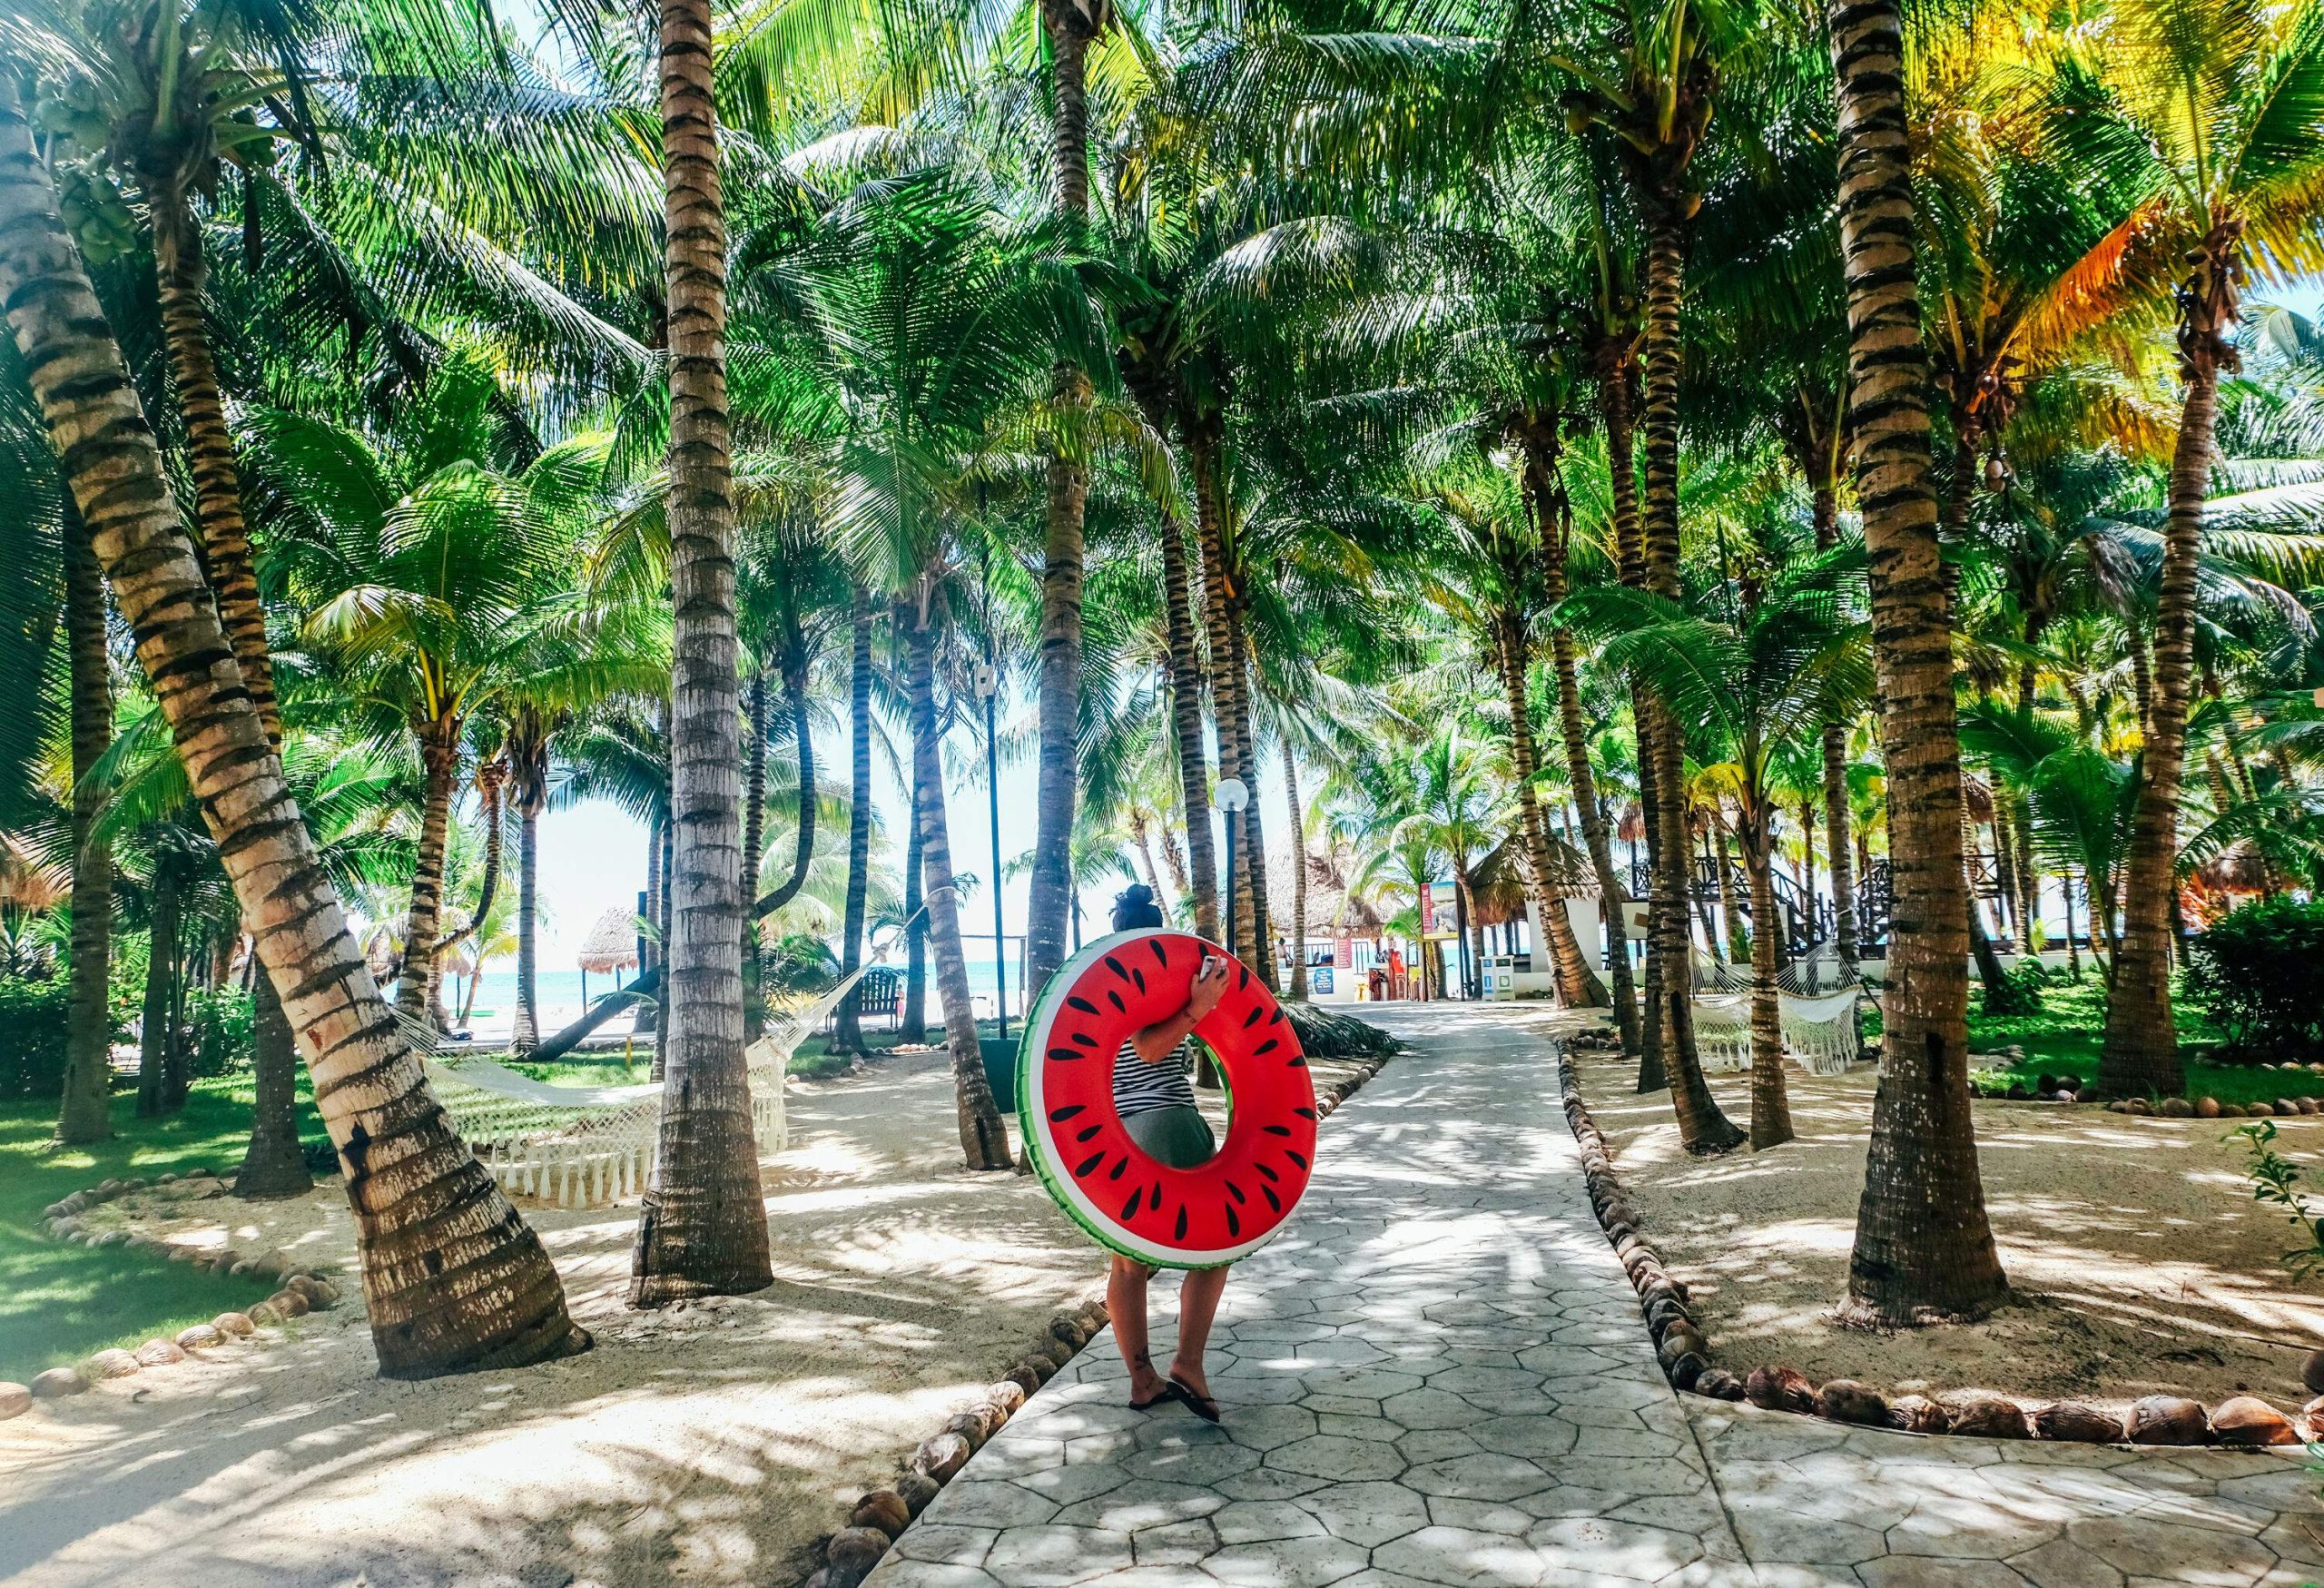 person walking through palm trees in tropical environment holding a large red inflatable ring